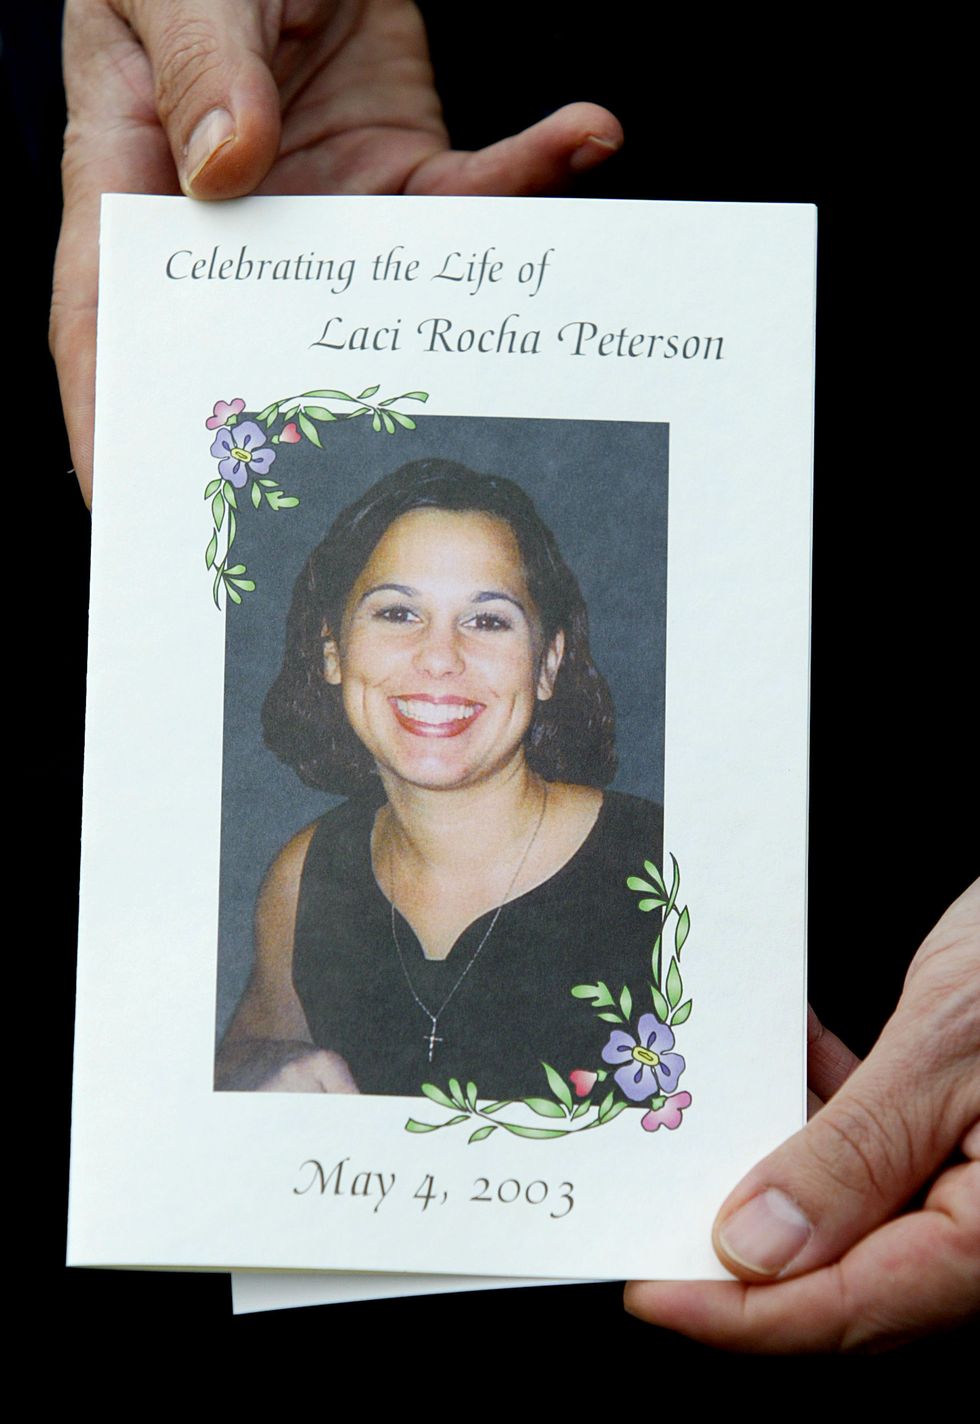 The program for the memorial service for Laci Peterson and her unborn son, Conner, held on May 4, 2003